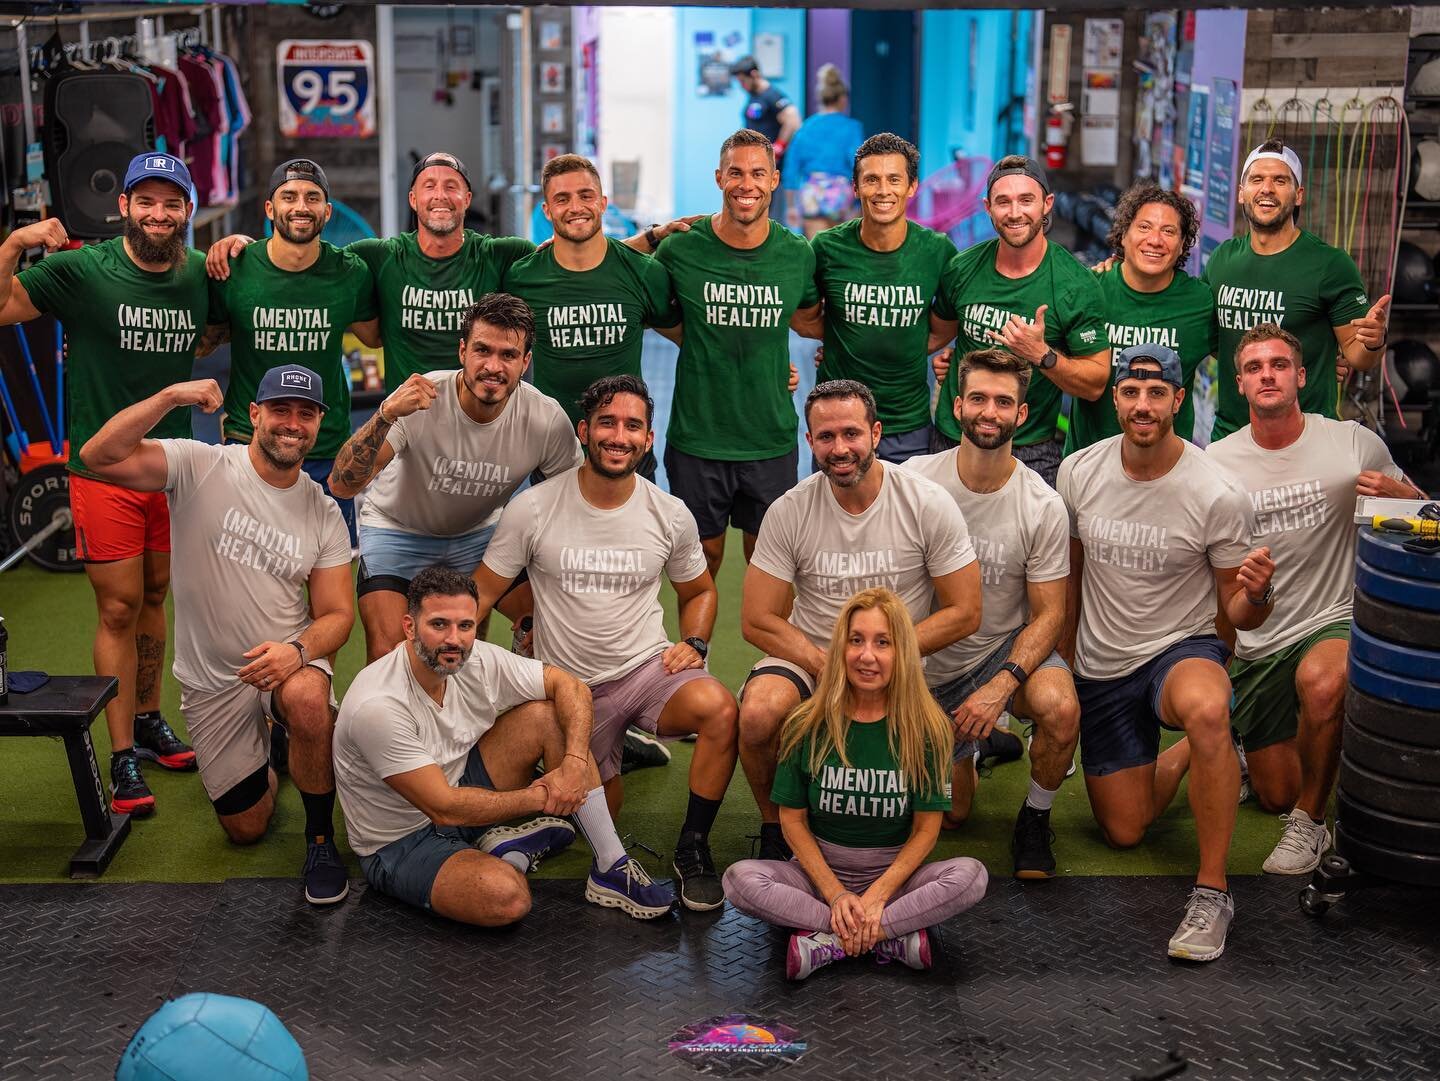 (MEN)TAL Health

This past Monday was the first @rhone ambassador meet up in Miami. 

It was also Mental Health day. As someone who has dealt with severe depression in the past, I cannot stress enough how important it is to take care of your mental h